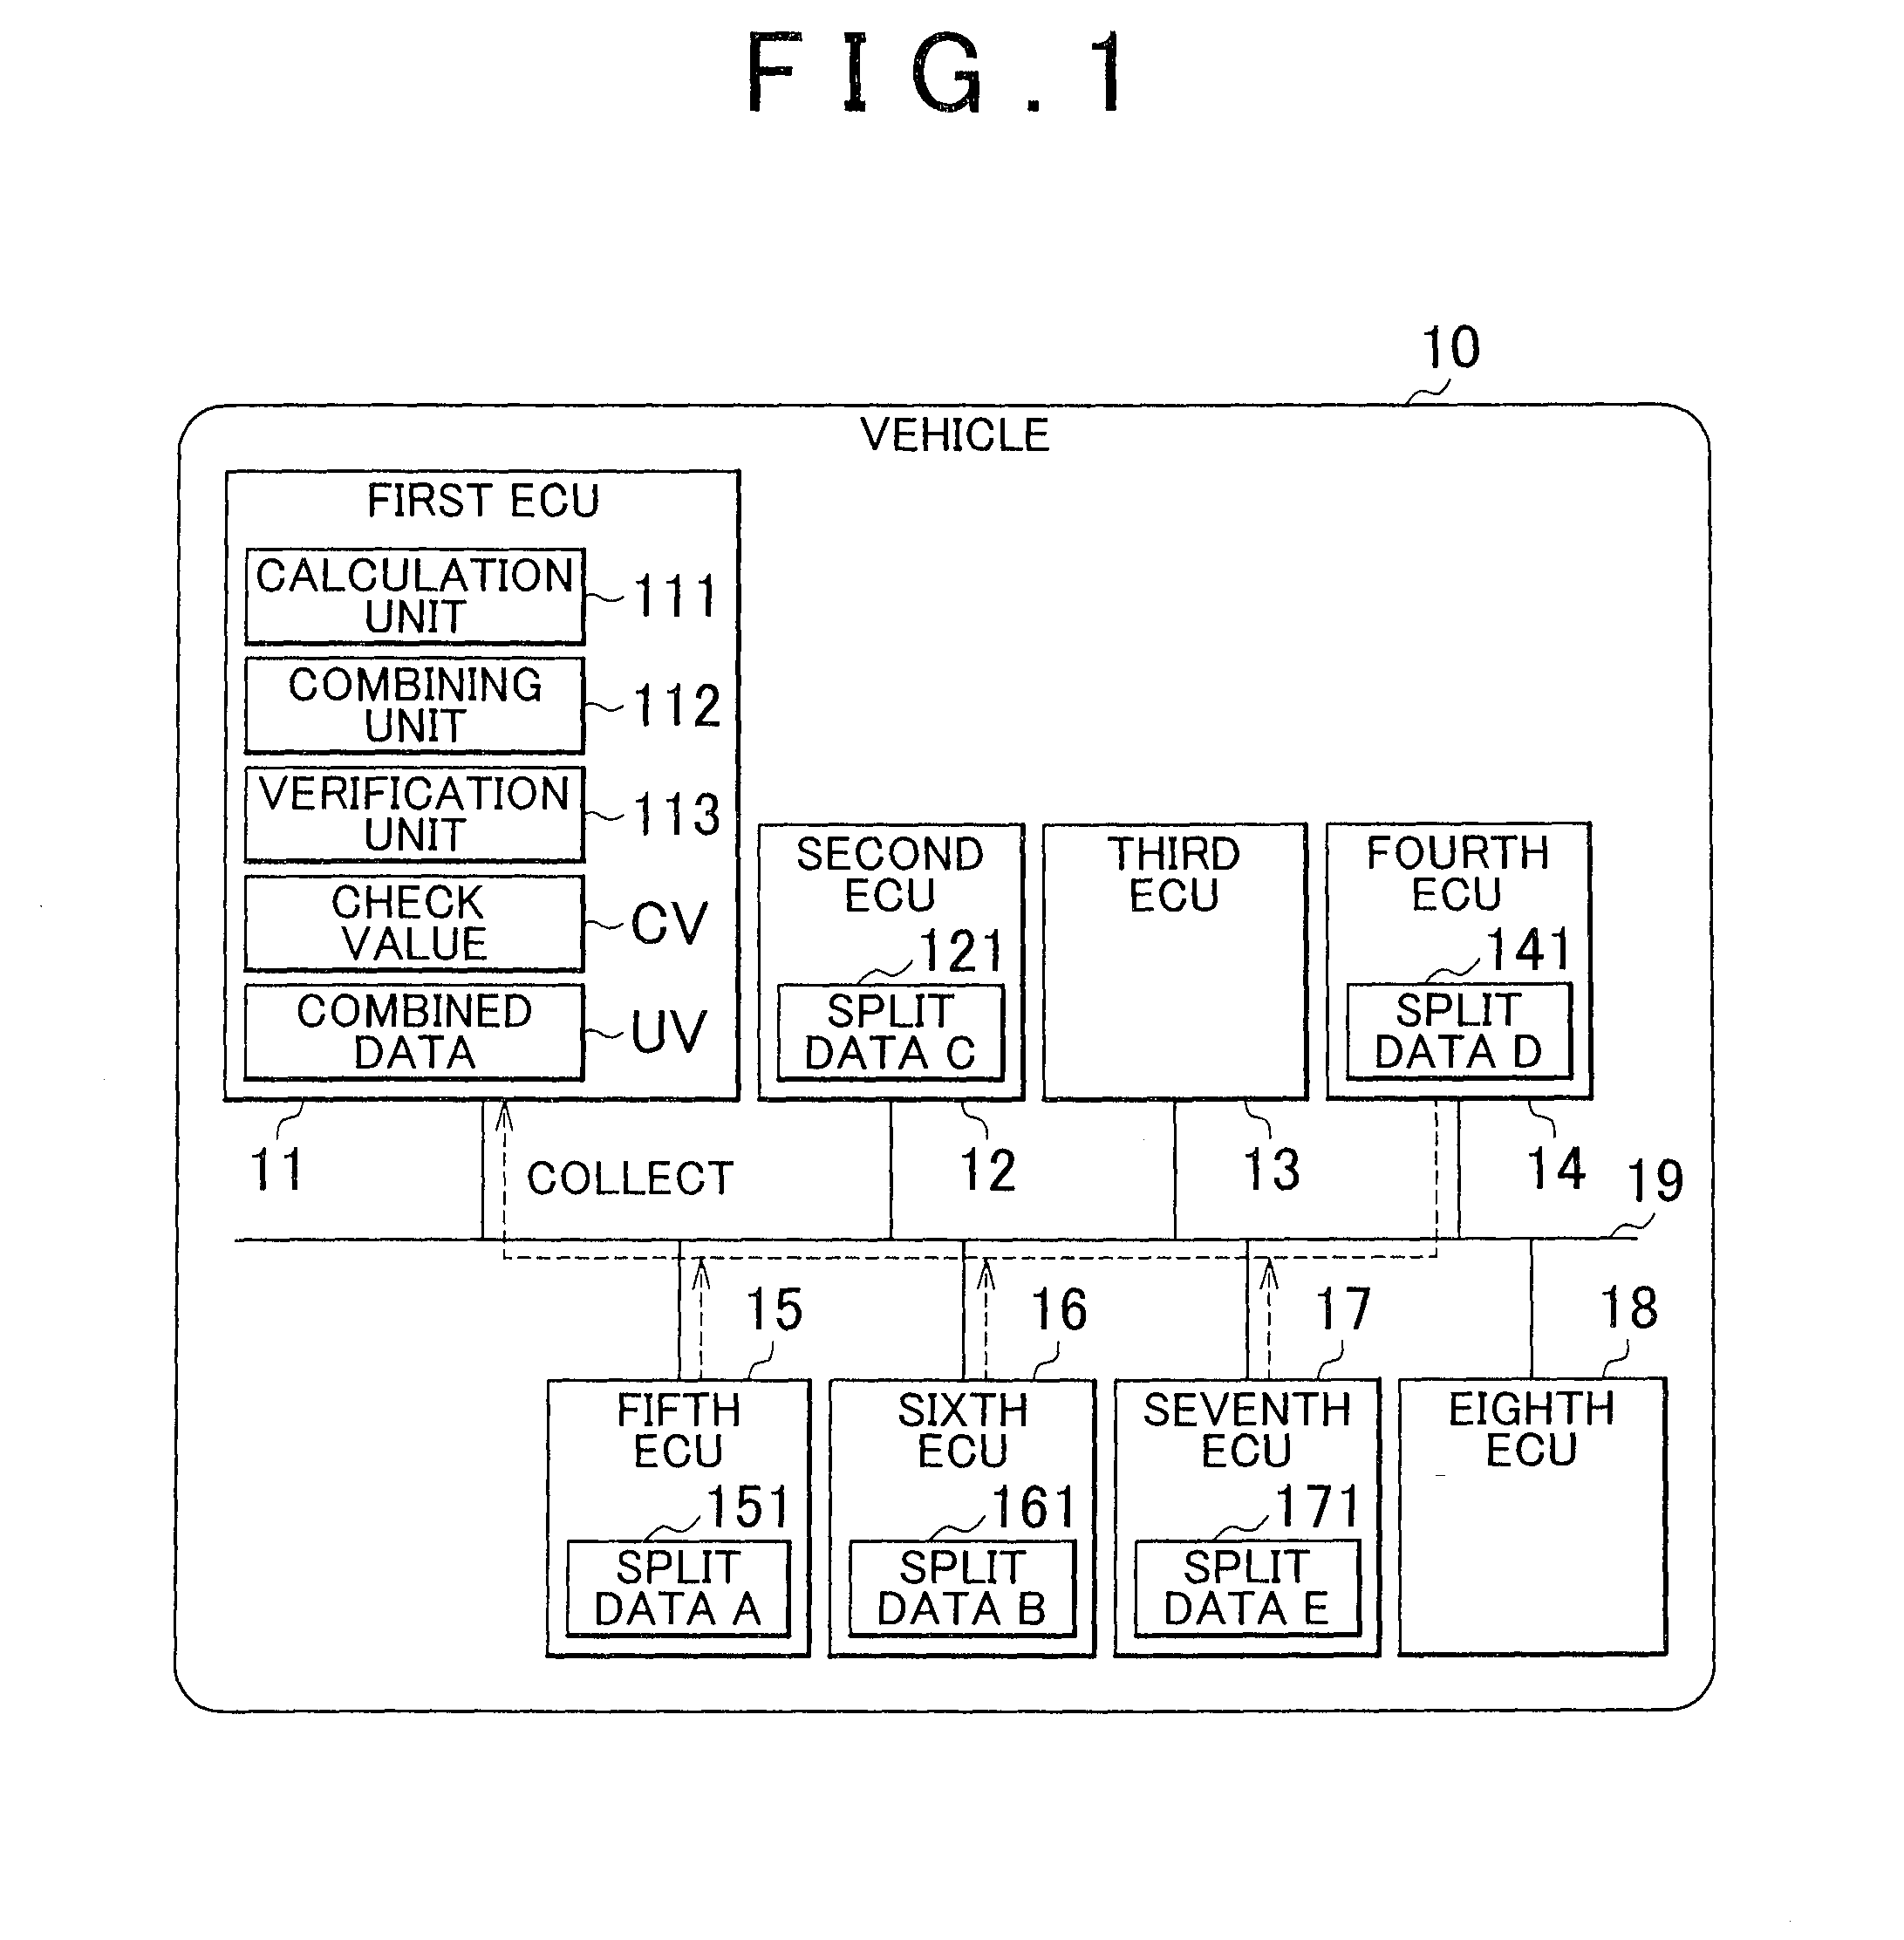 Method and system for a vehicle information integrity verification